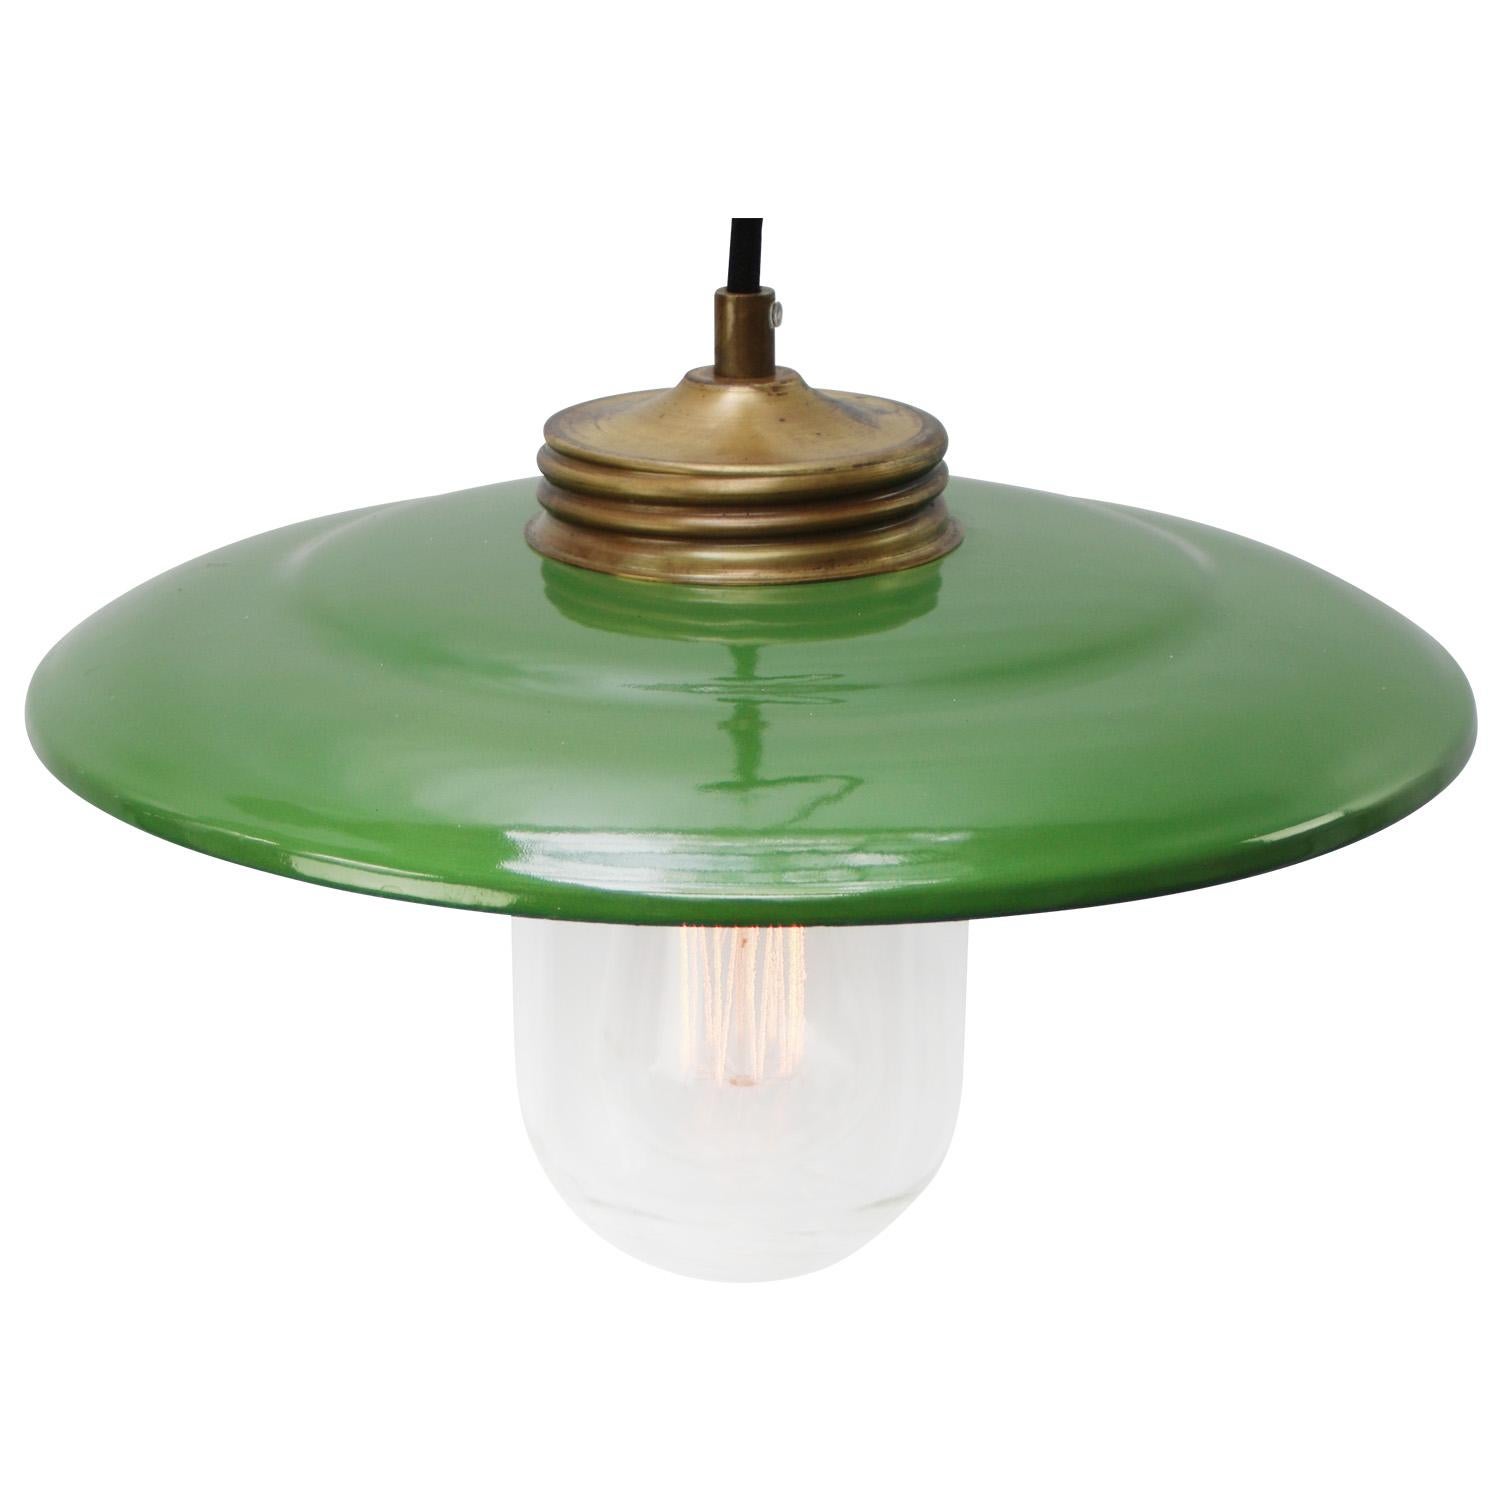 Green enamel Industrial hanging lamp.
Clear glass with brass top.
Weight: 1.30 kg / 2.9 lb
Priced per individual item. All lamps have been made suitable by international standards for incandescent light bulbs, energy-efficient and LED bulbs.